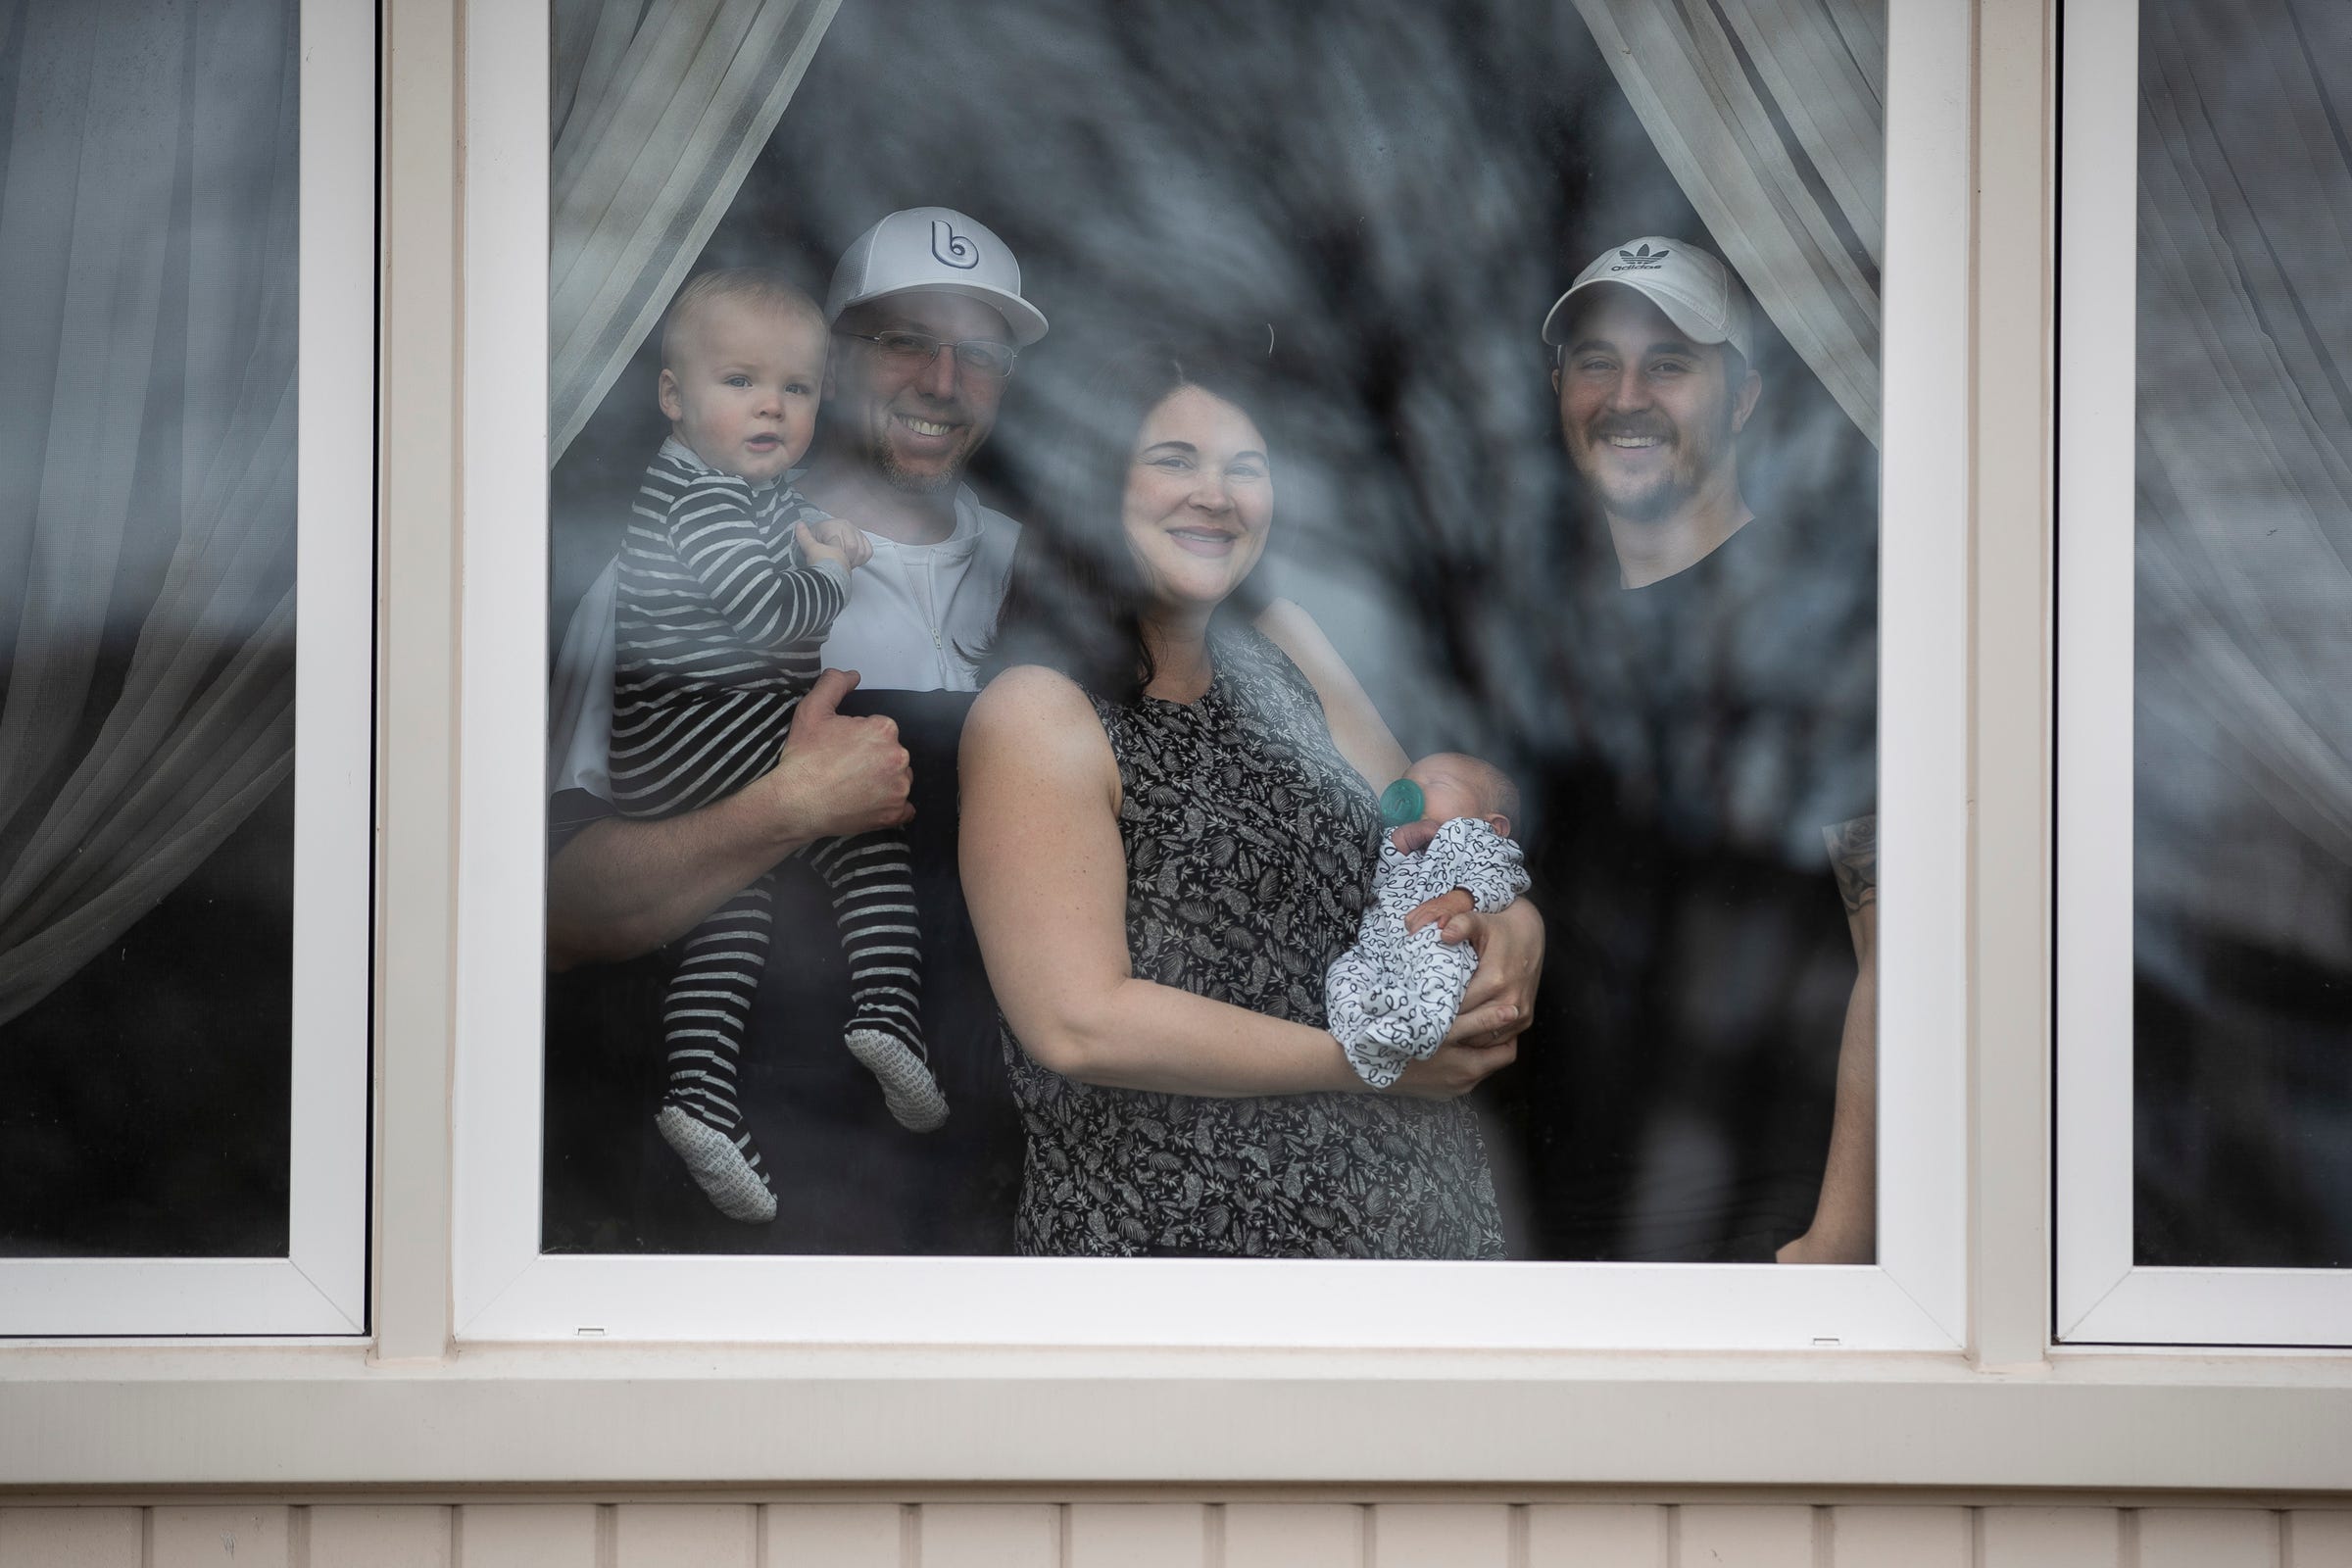 Trevor and Jennifer Thompson with their sons Mack, 1, Hollis, 3 days, and Tim Vigus, 24, pose for a photo at the their home in Warren, Tuesday, March 31, 2020.